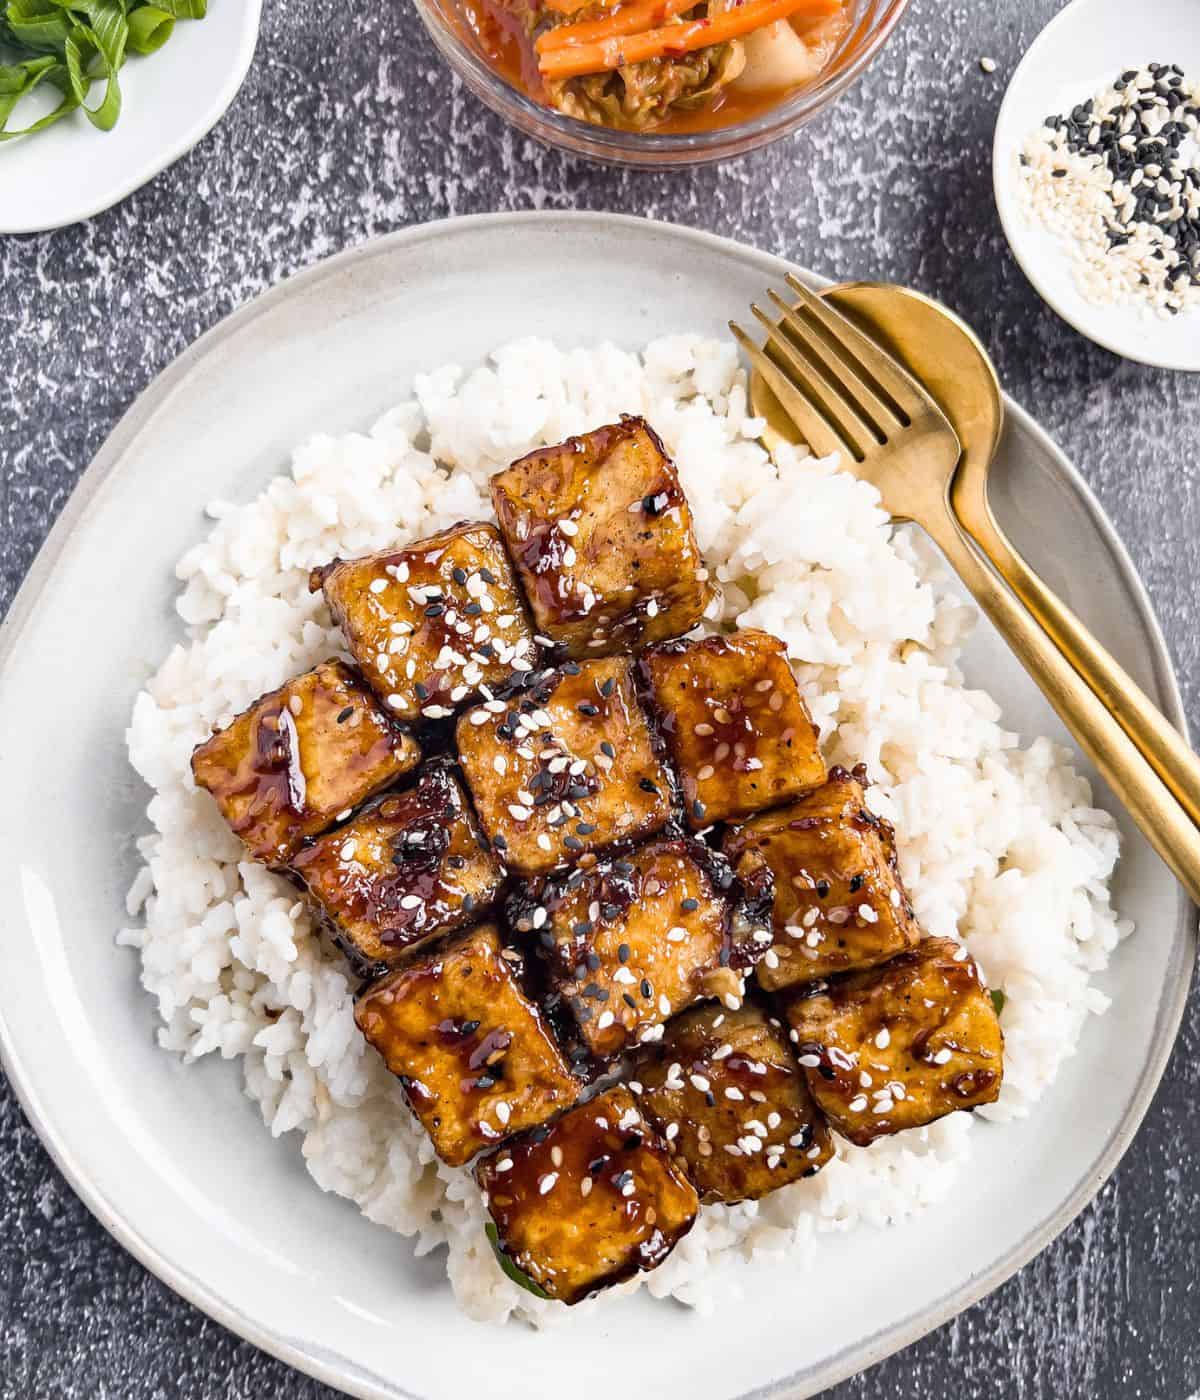 Finish dish of sweet sticky and sesame tofu on the table with kimchi in the side.